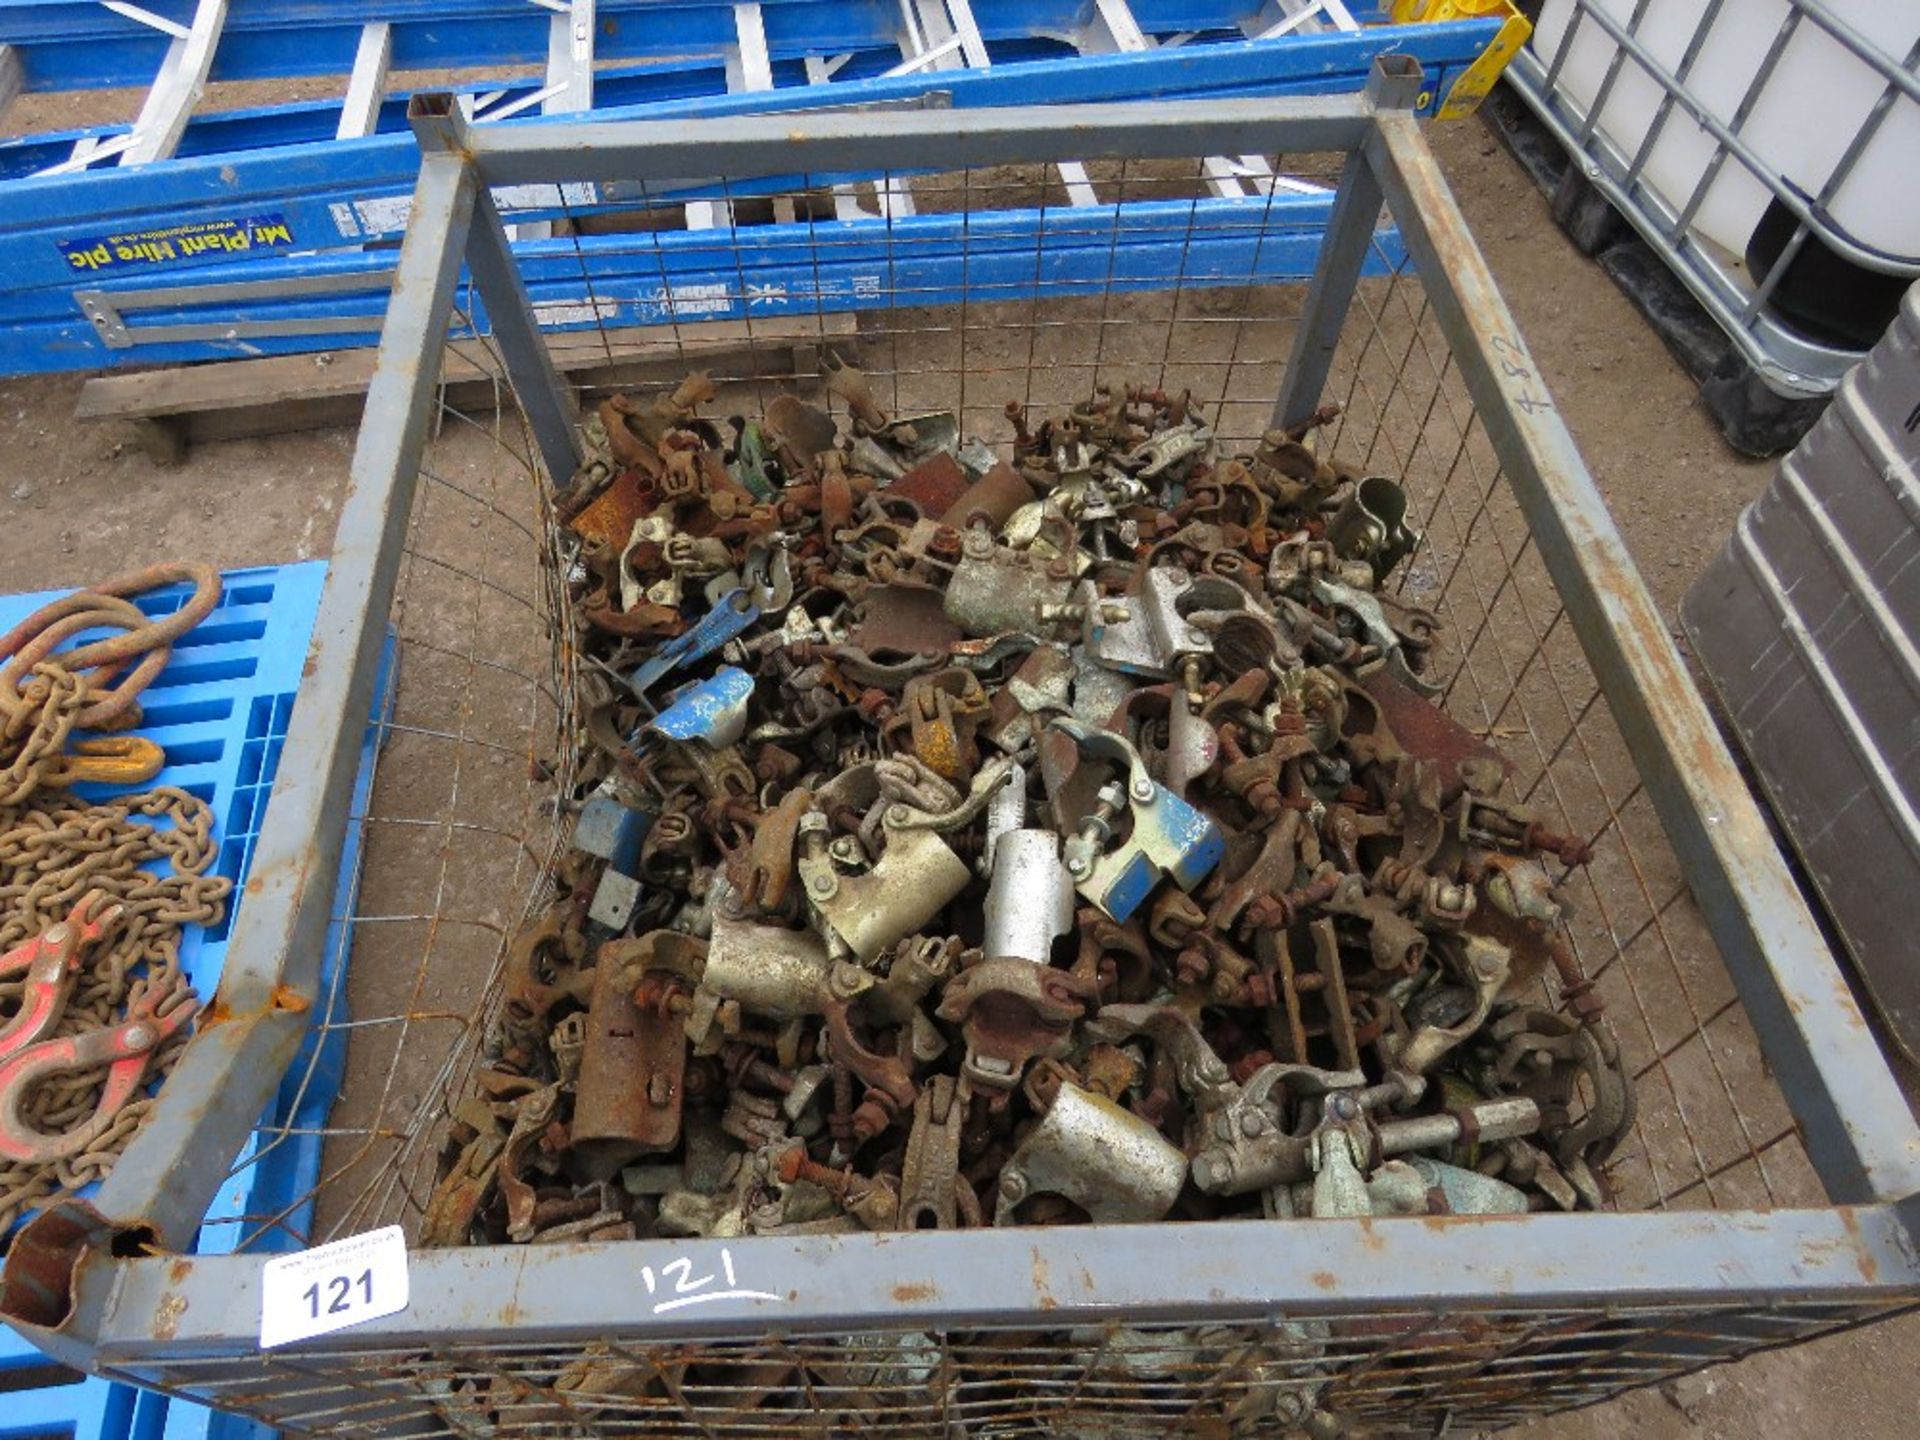 STILLAGE CONTAINING APPROXIMATELY 480 ASSORTED SCAFFOLD CLIPS. THIS LOT IS SOLD UNDER THE AUCTIONEER